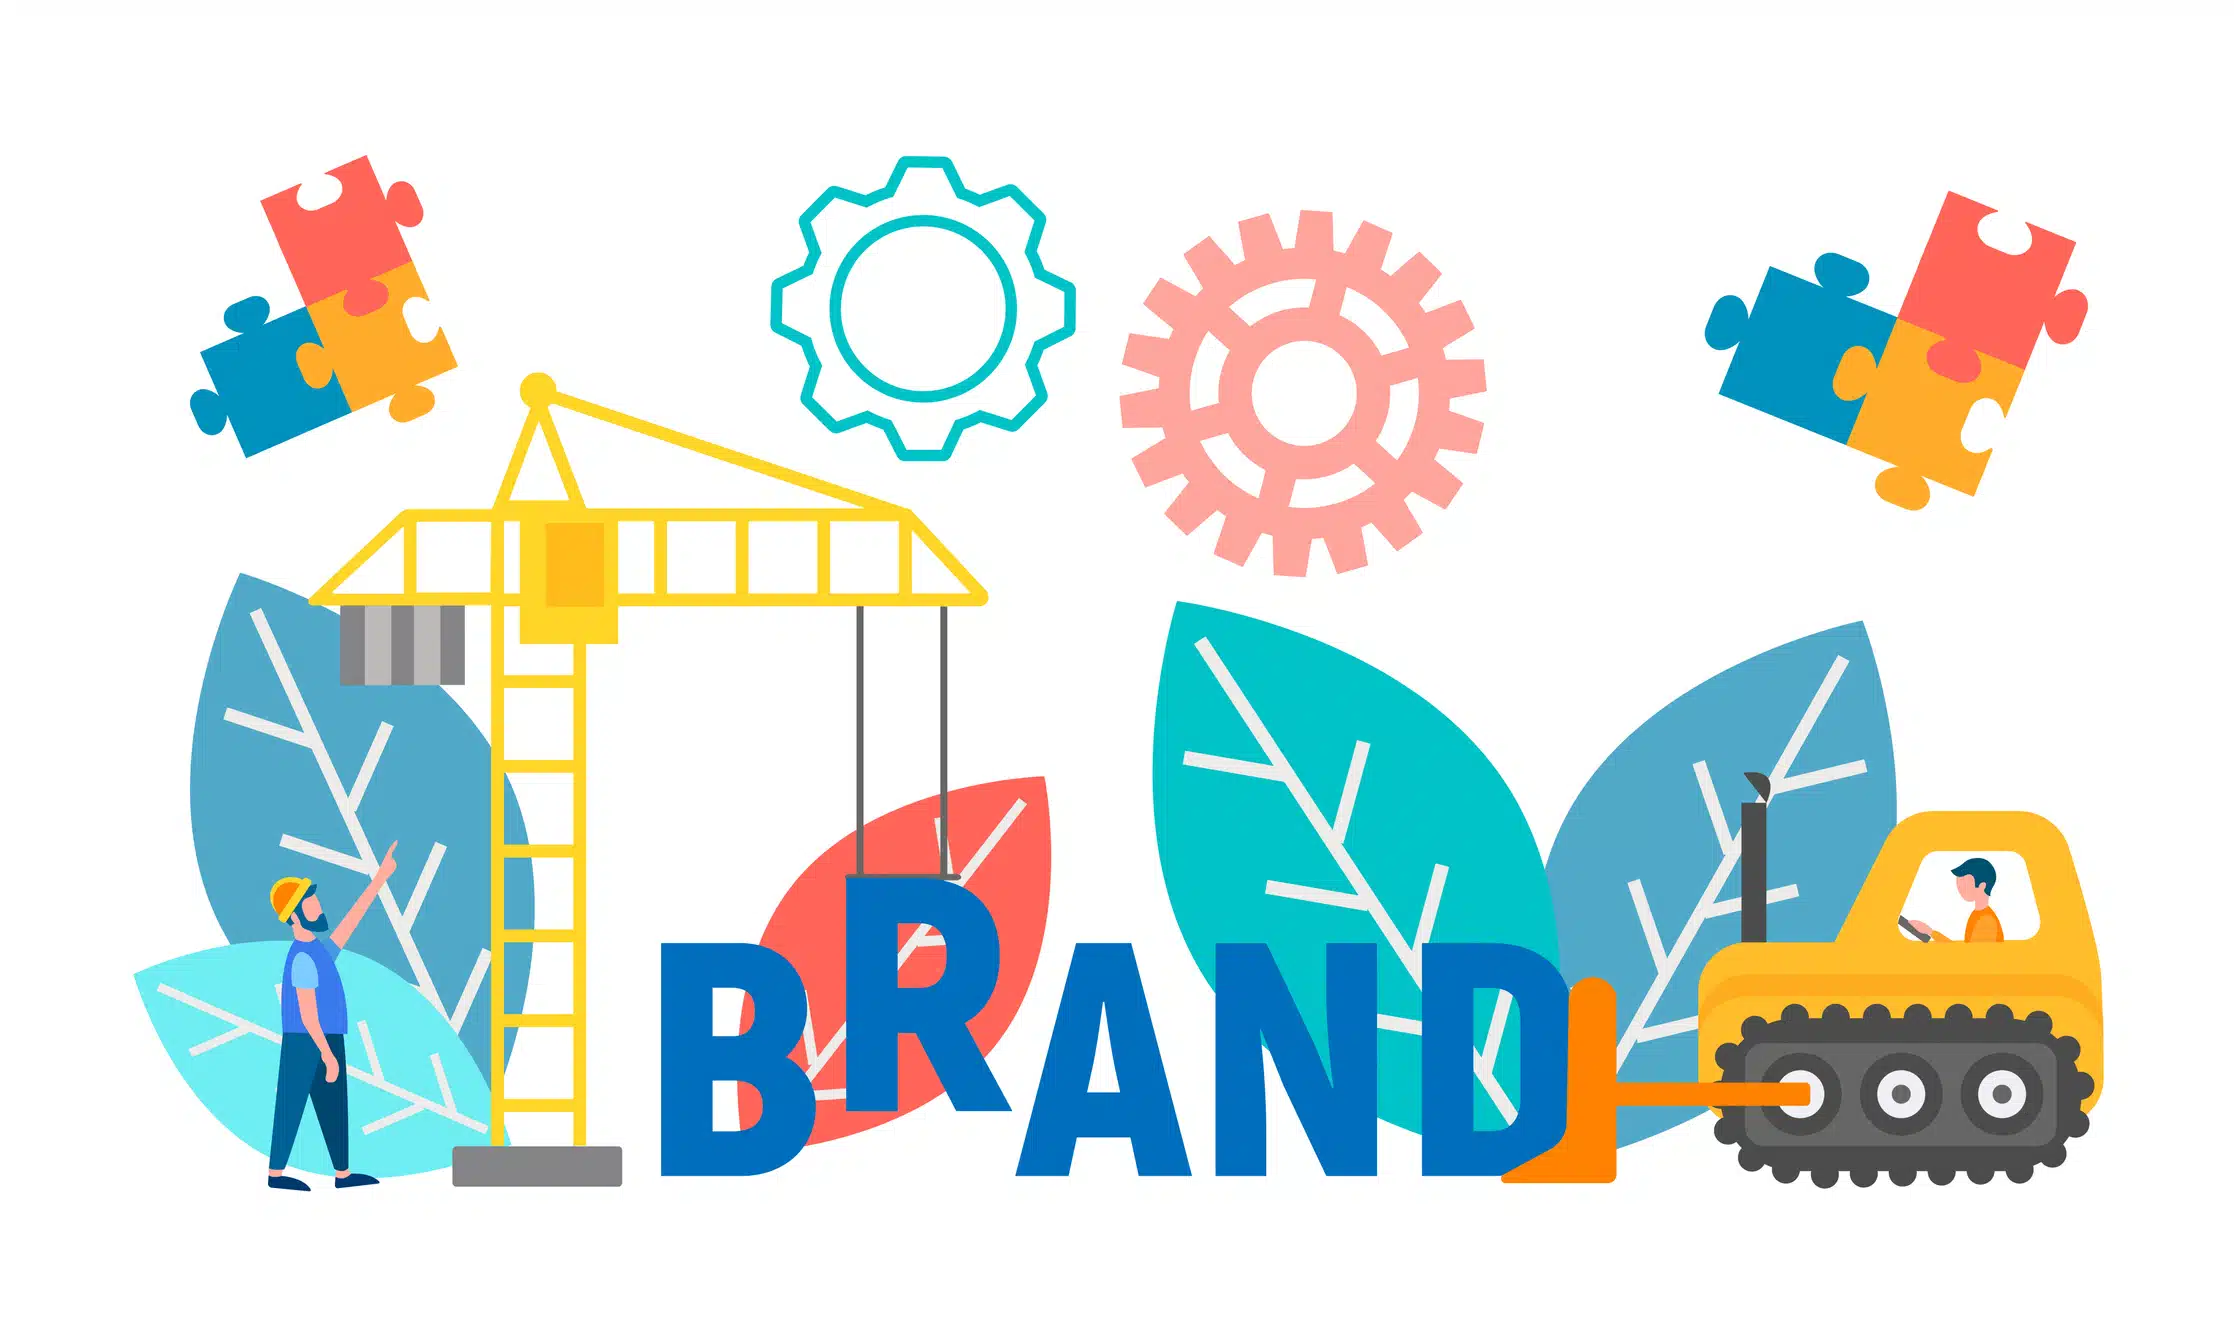 a digital logo rebrand can help your business grow online